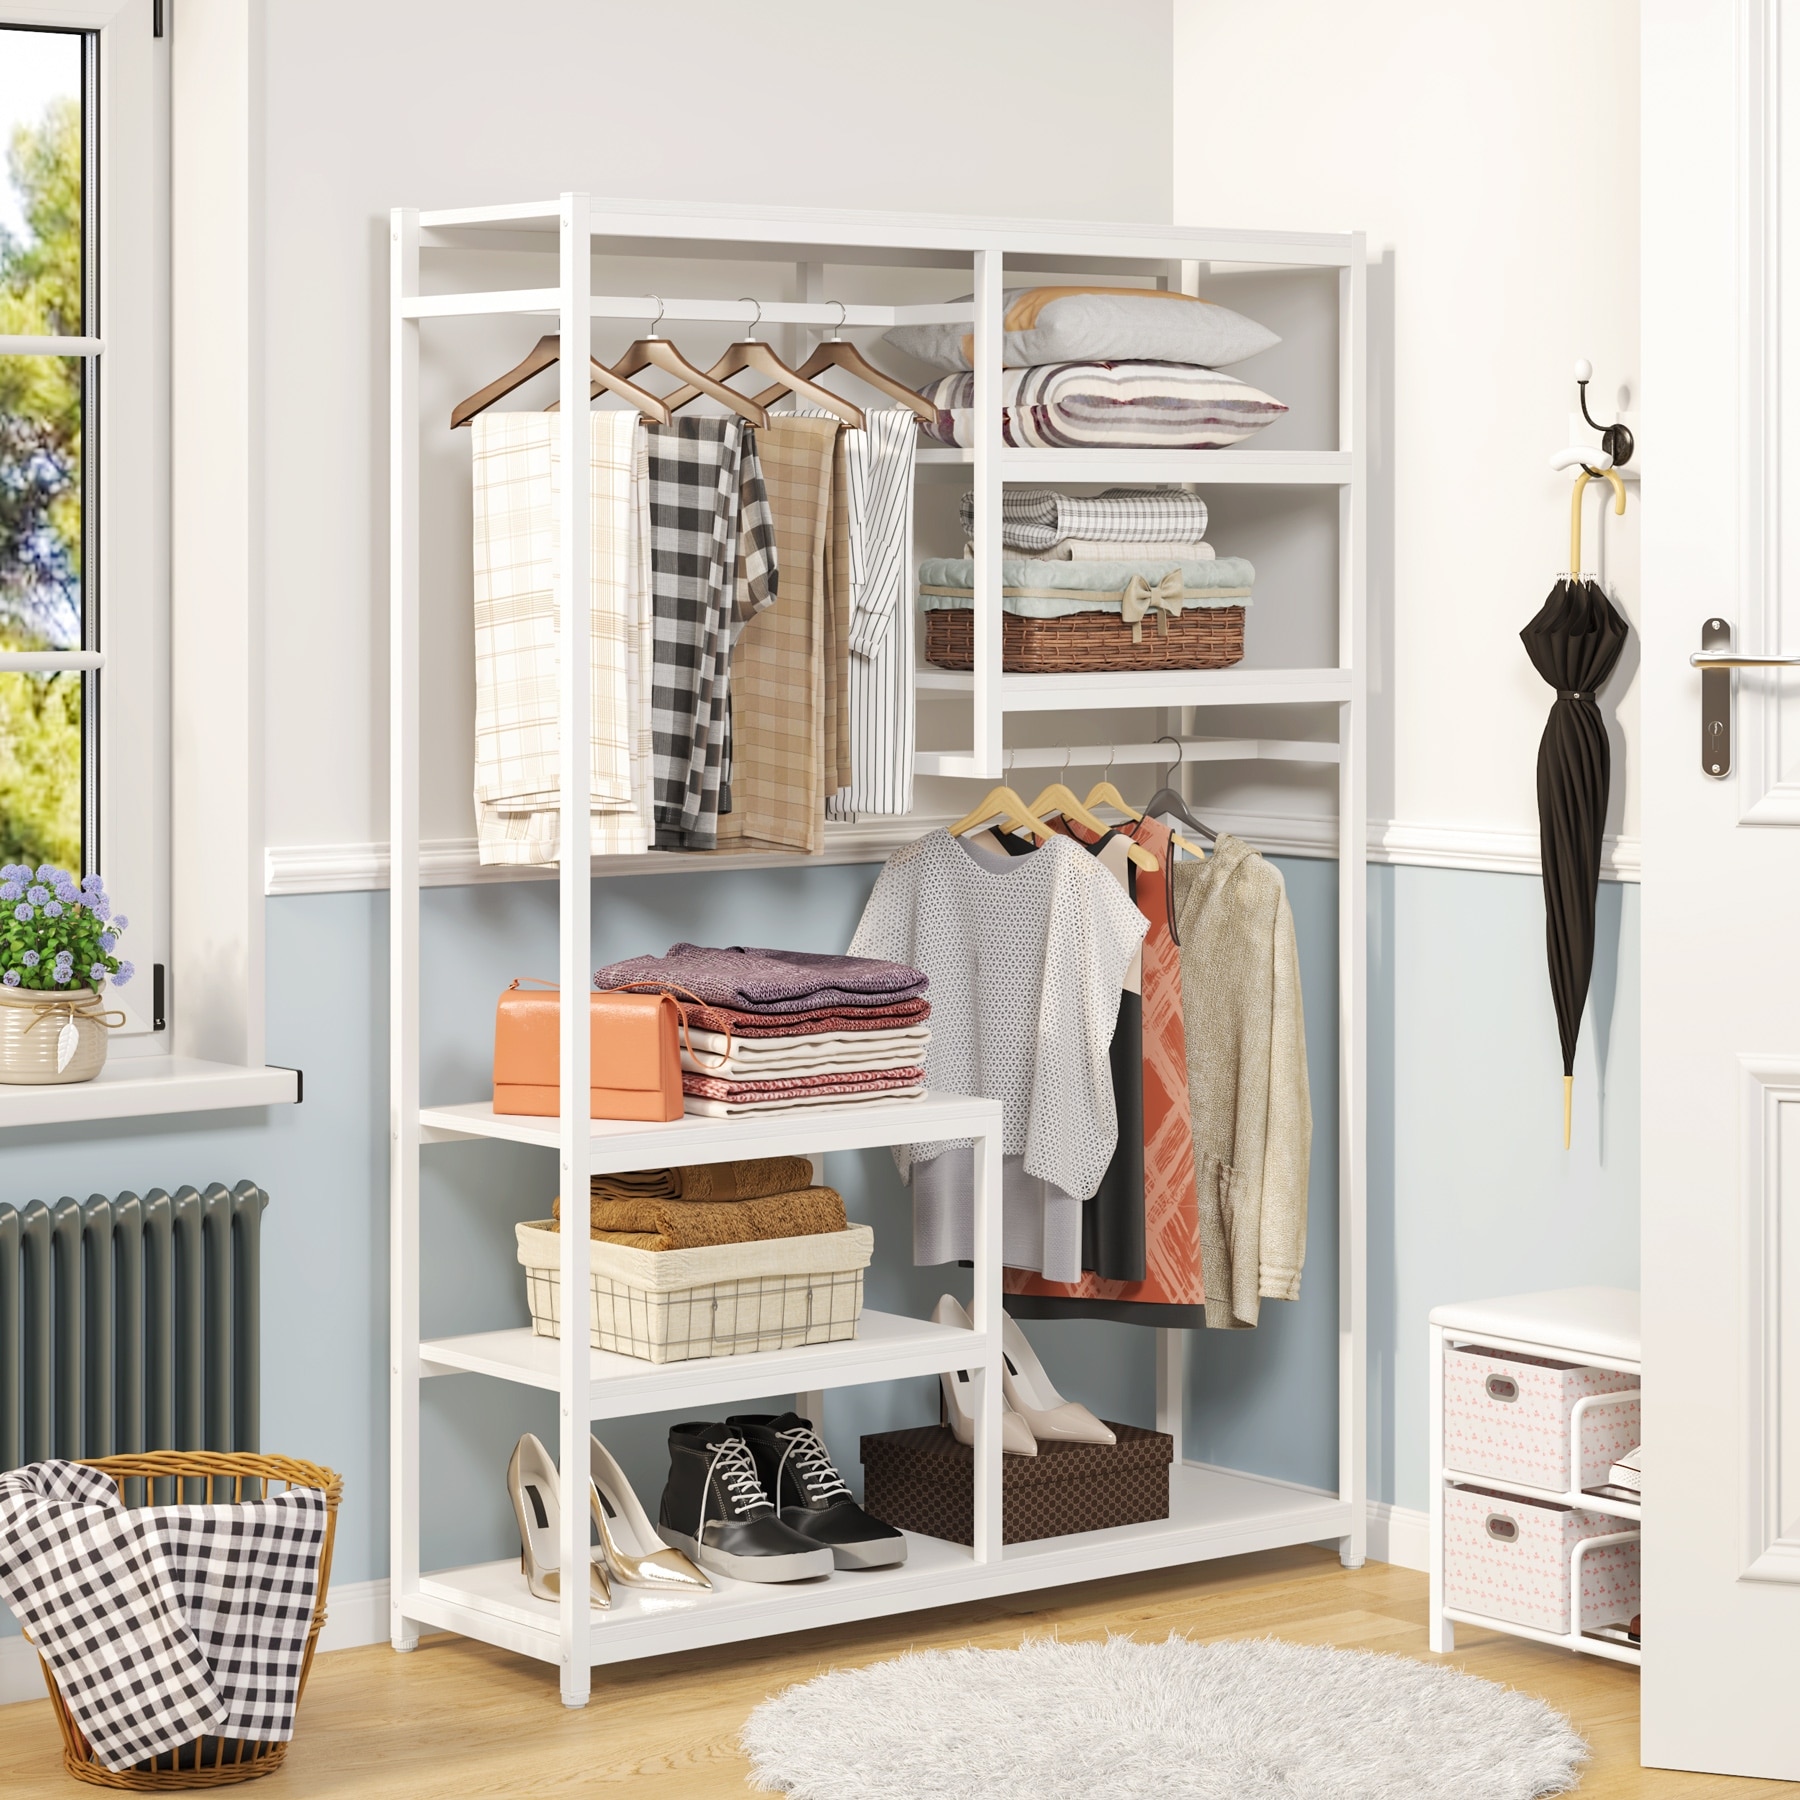 https://ak1.ostkcdn.com/images/products/is/images/direct/34bc4d82a89b7d4e5ff293cd6c4ee05ce7cc8fc1/Free-Standing-Closet-Organizer-Double-Hanging-Rod-Clothes-Garment-Racks.jpg